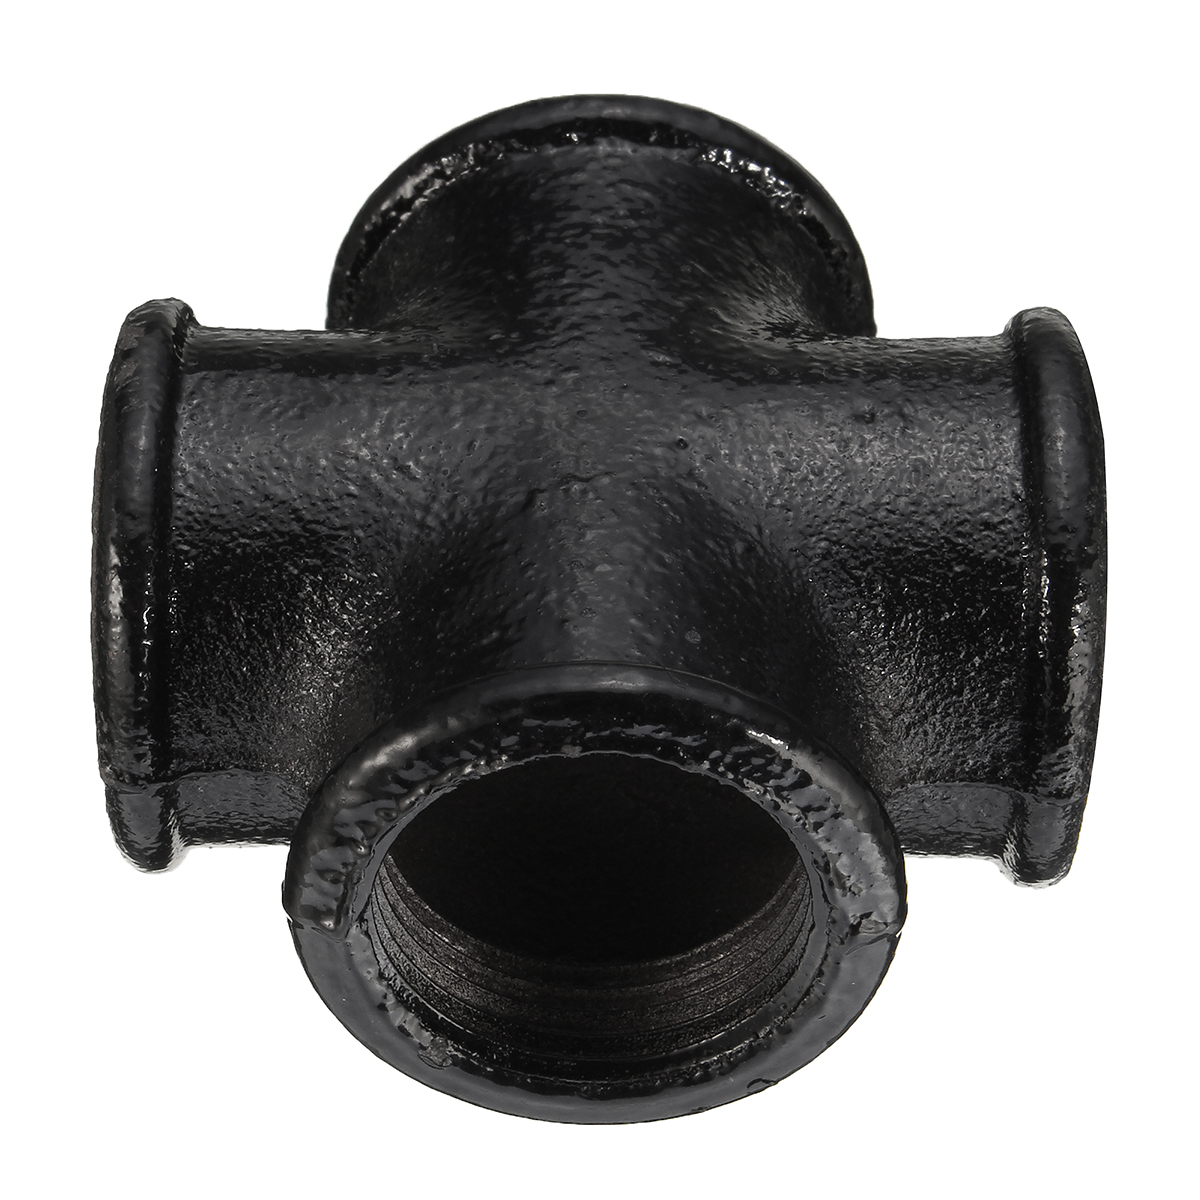 34-Inch-Black-Iron-Pipe-Threaded-Cross-Fitting-Plumbing-Malleable-Cross-Pipes-Fittings-1334049-6